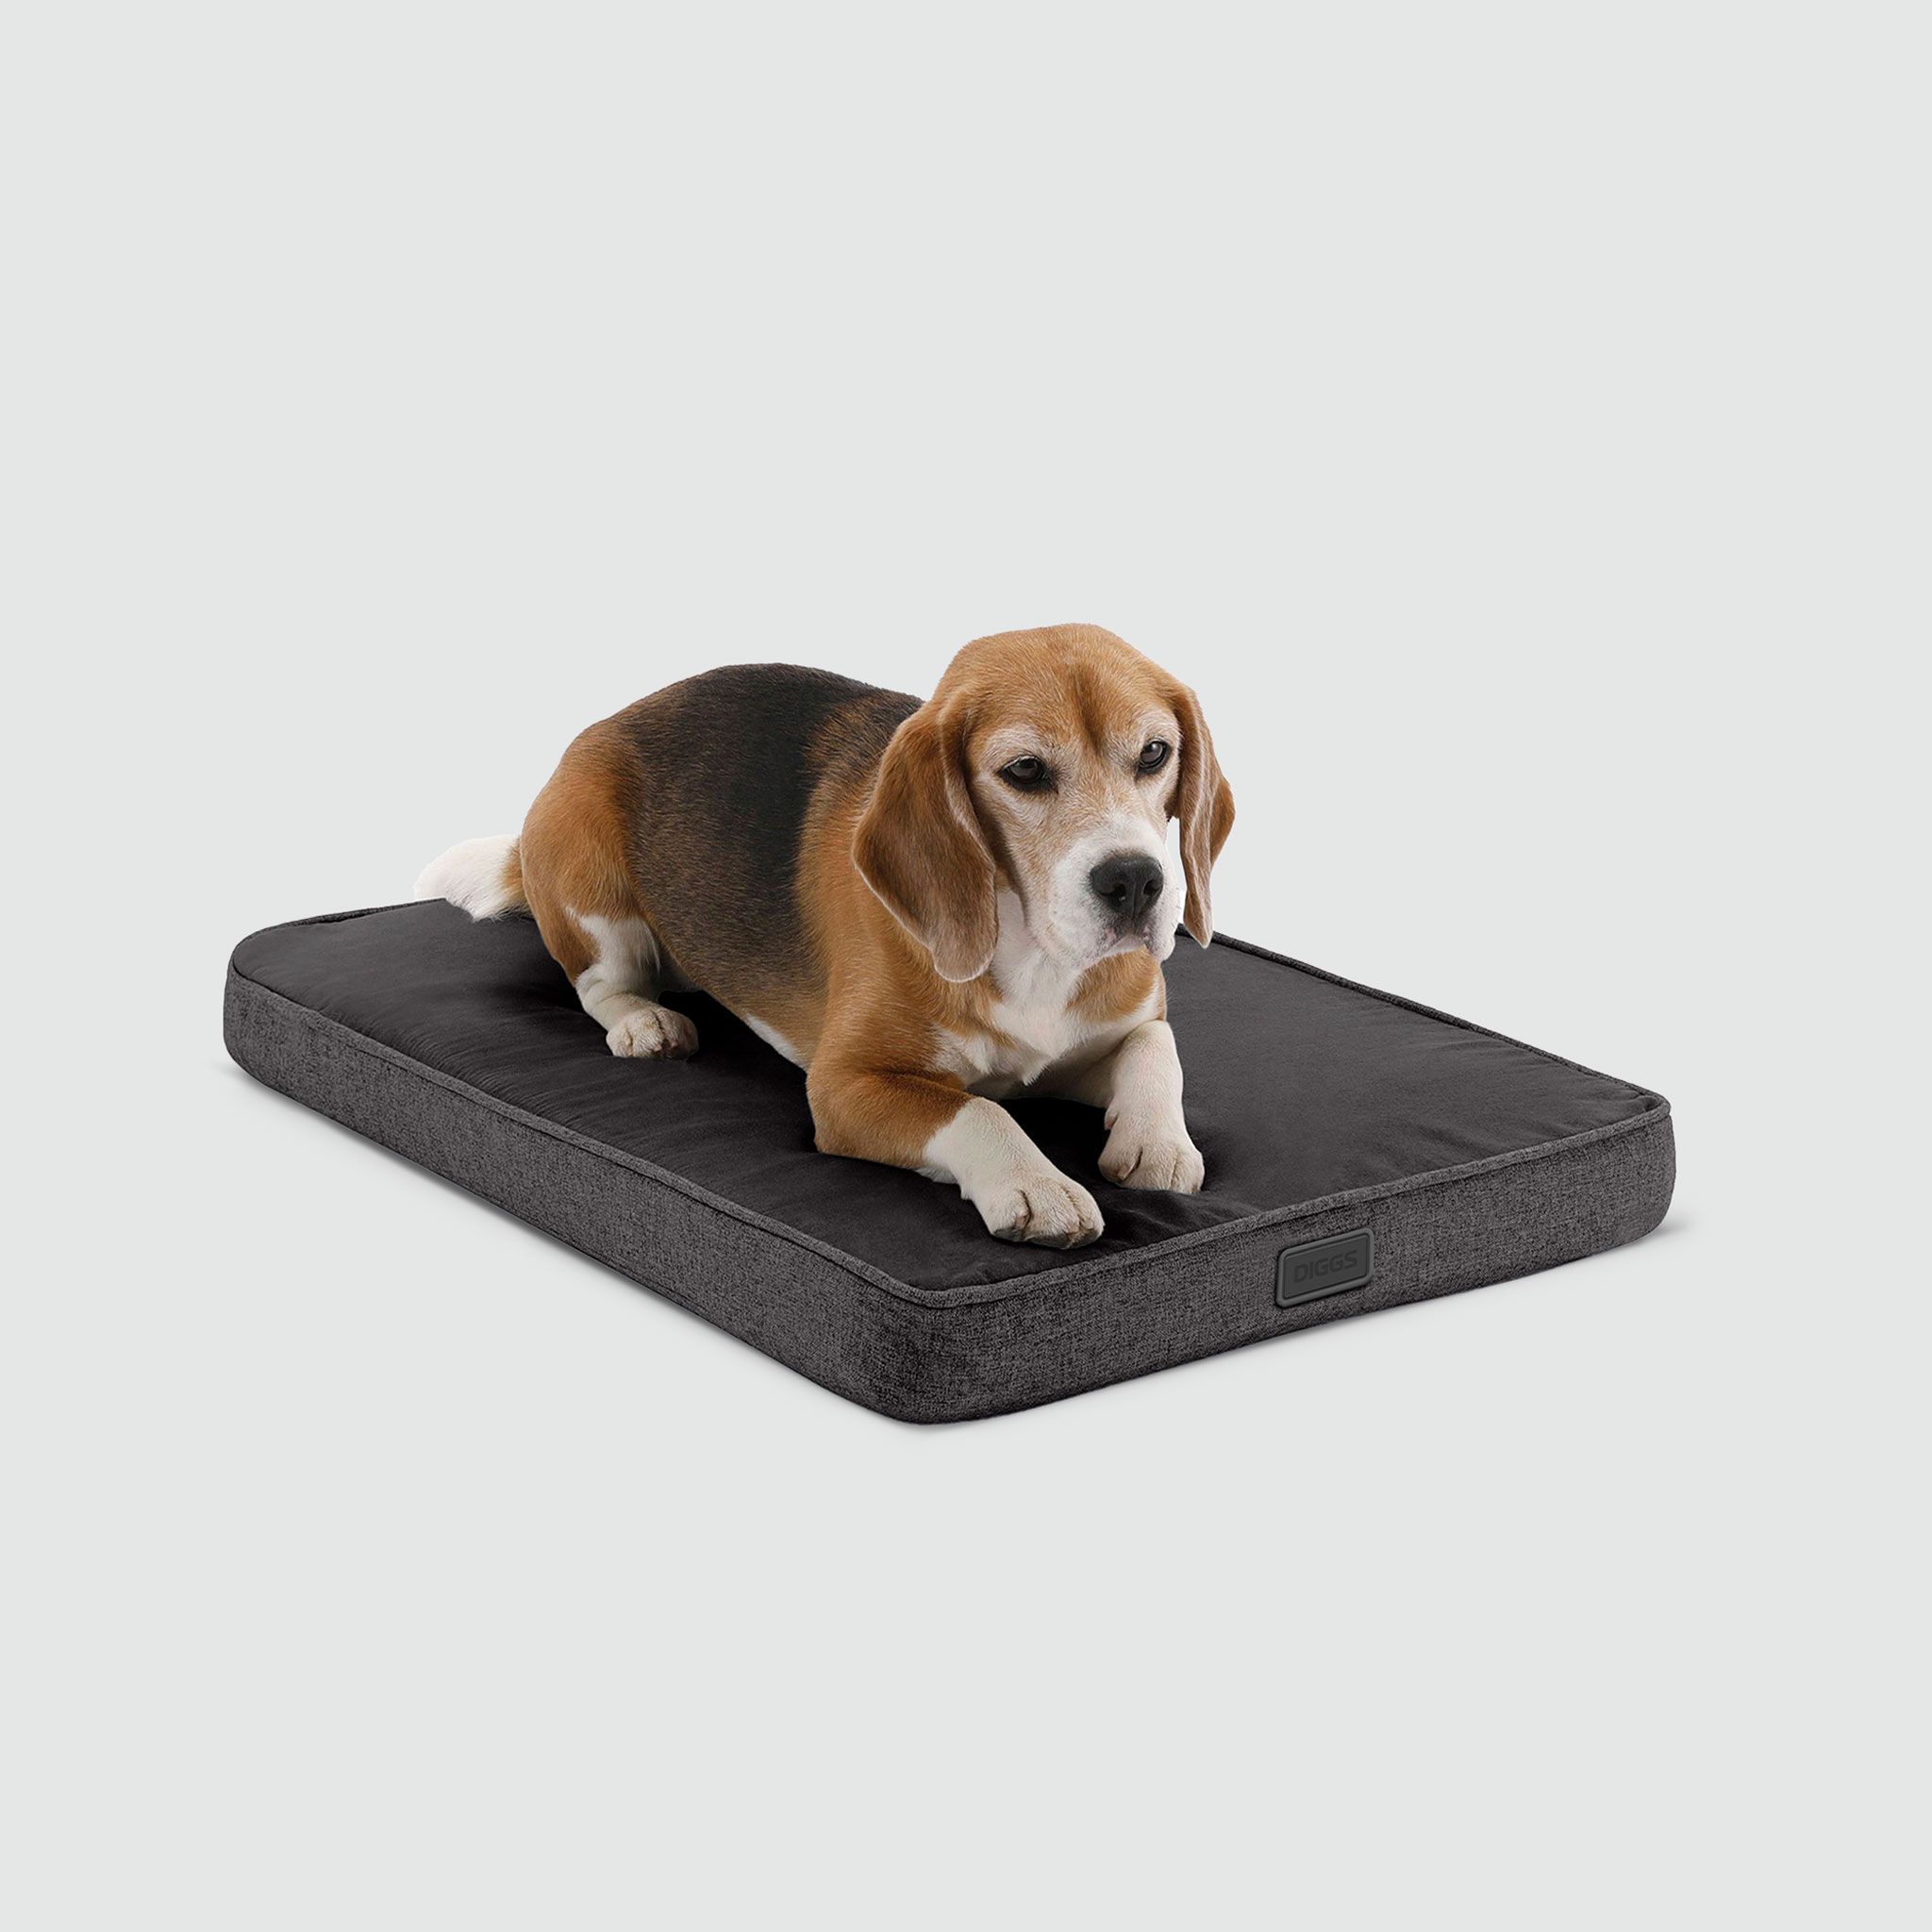 A beagle dog laying on a dog bed